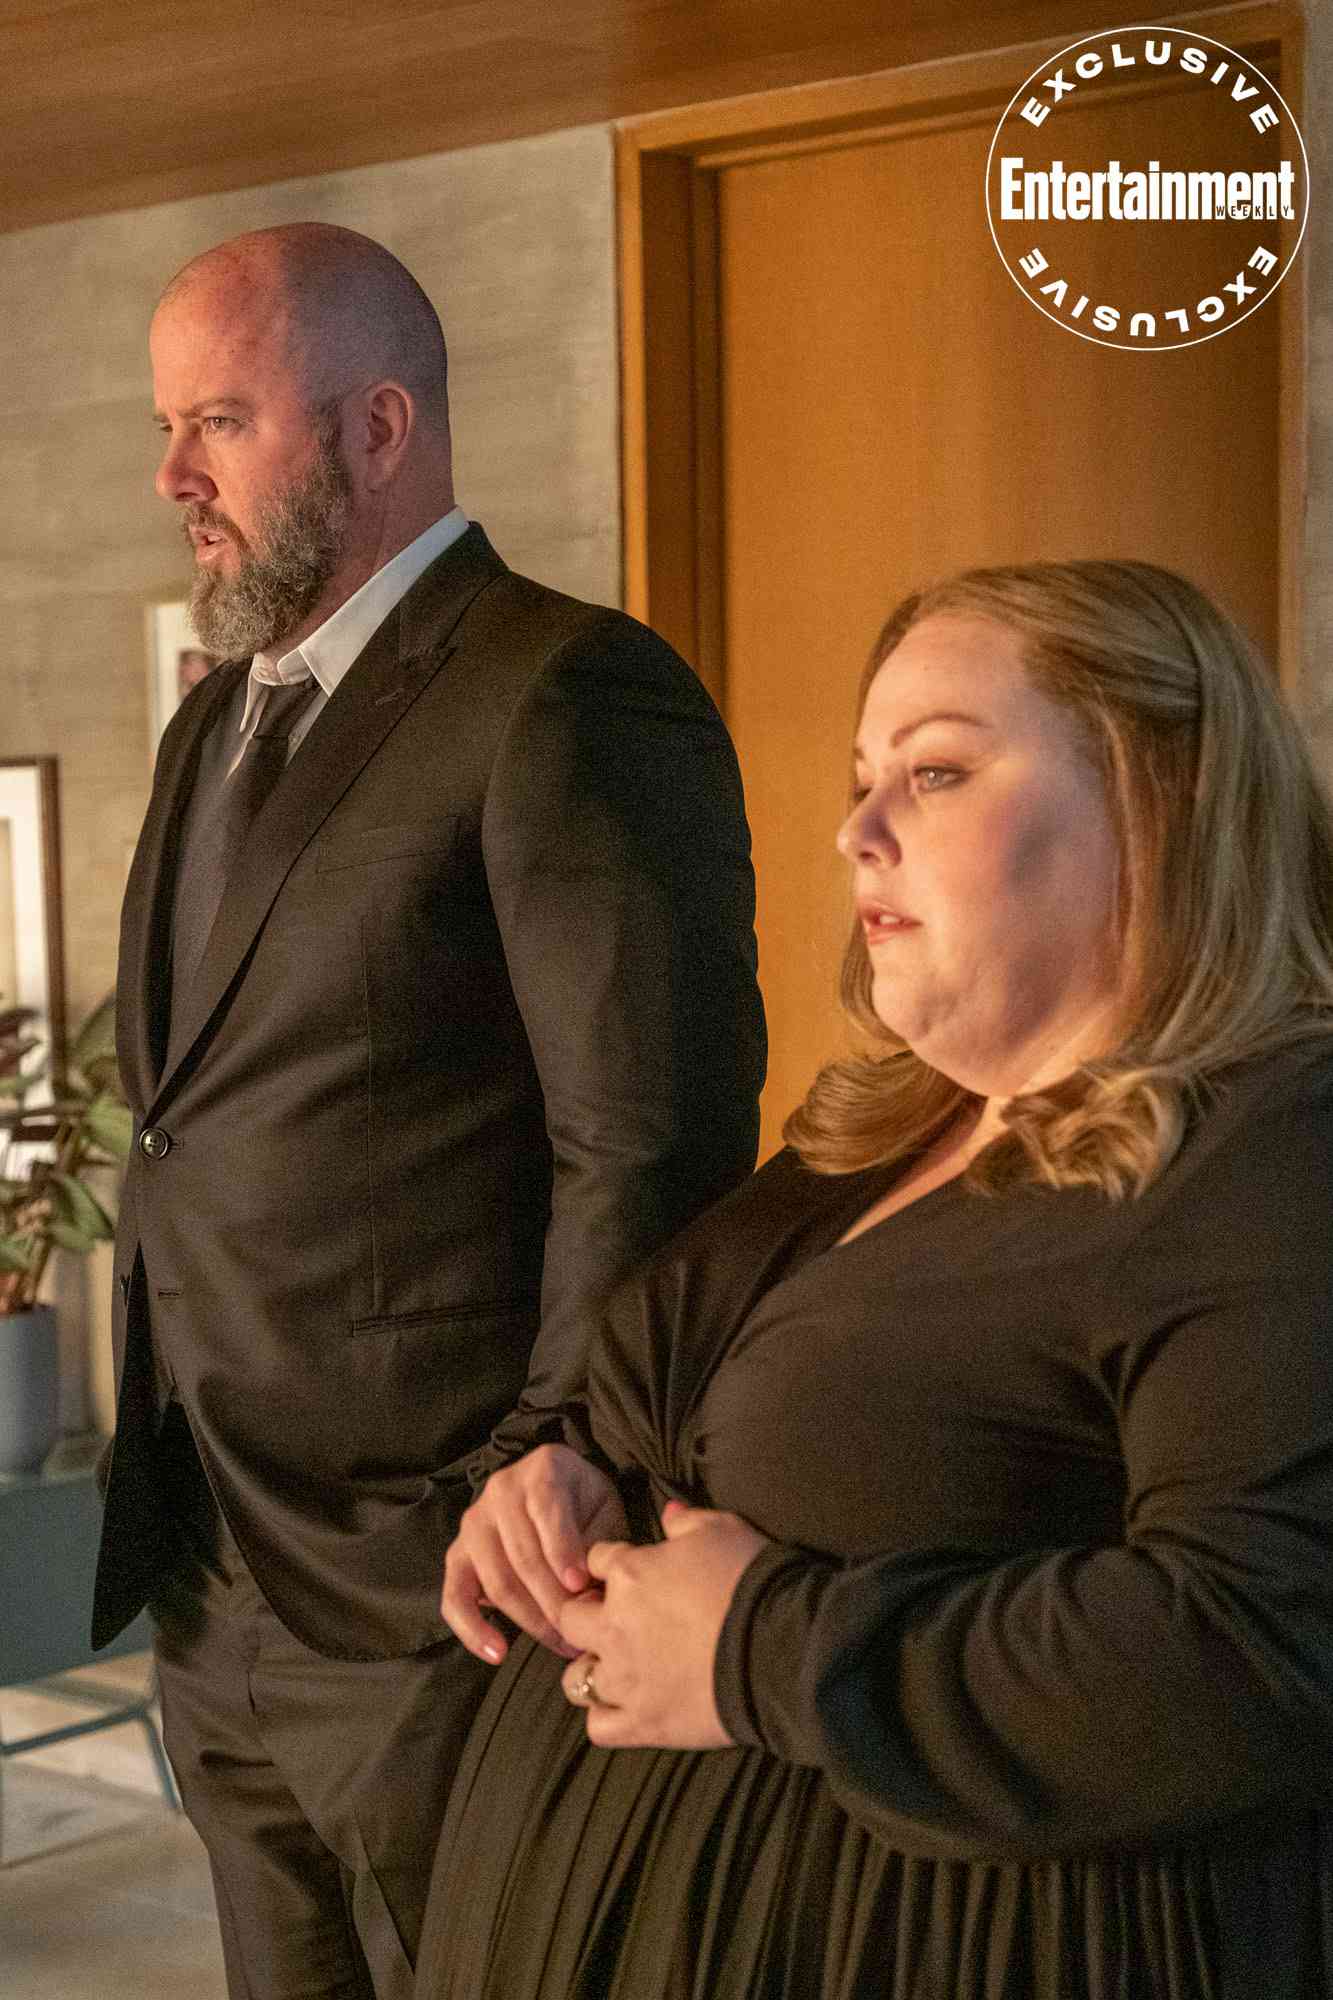 THIS IS US -- “Us” Episode 618 -- Pictured: (l-r) Chris Sullivan as Toby, Chrissy Metz as Kate -- (Photo by: Ron Batzdorff/NBC)